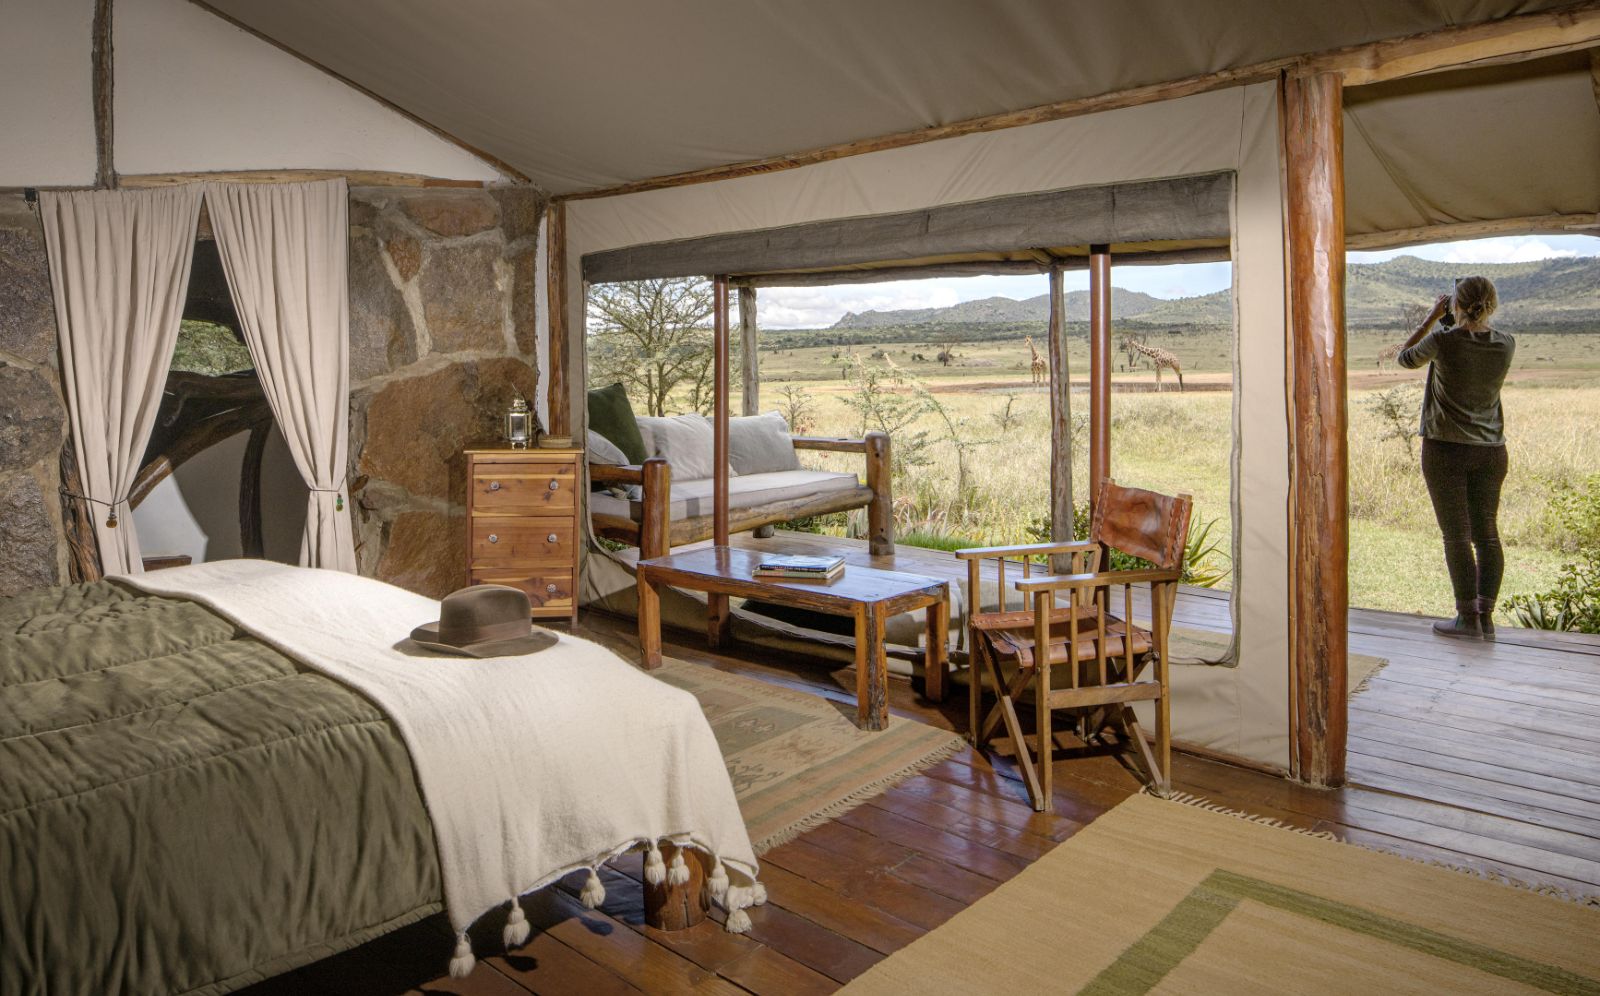 Guest tent interior at Enasoit private house on the Laikipia Plateau in Kenya